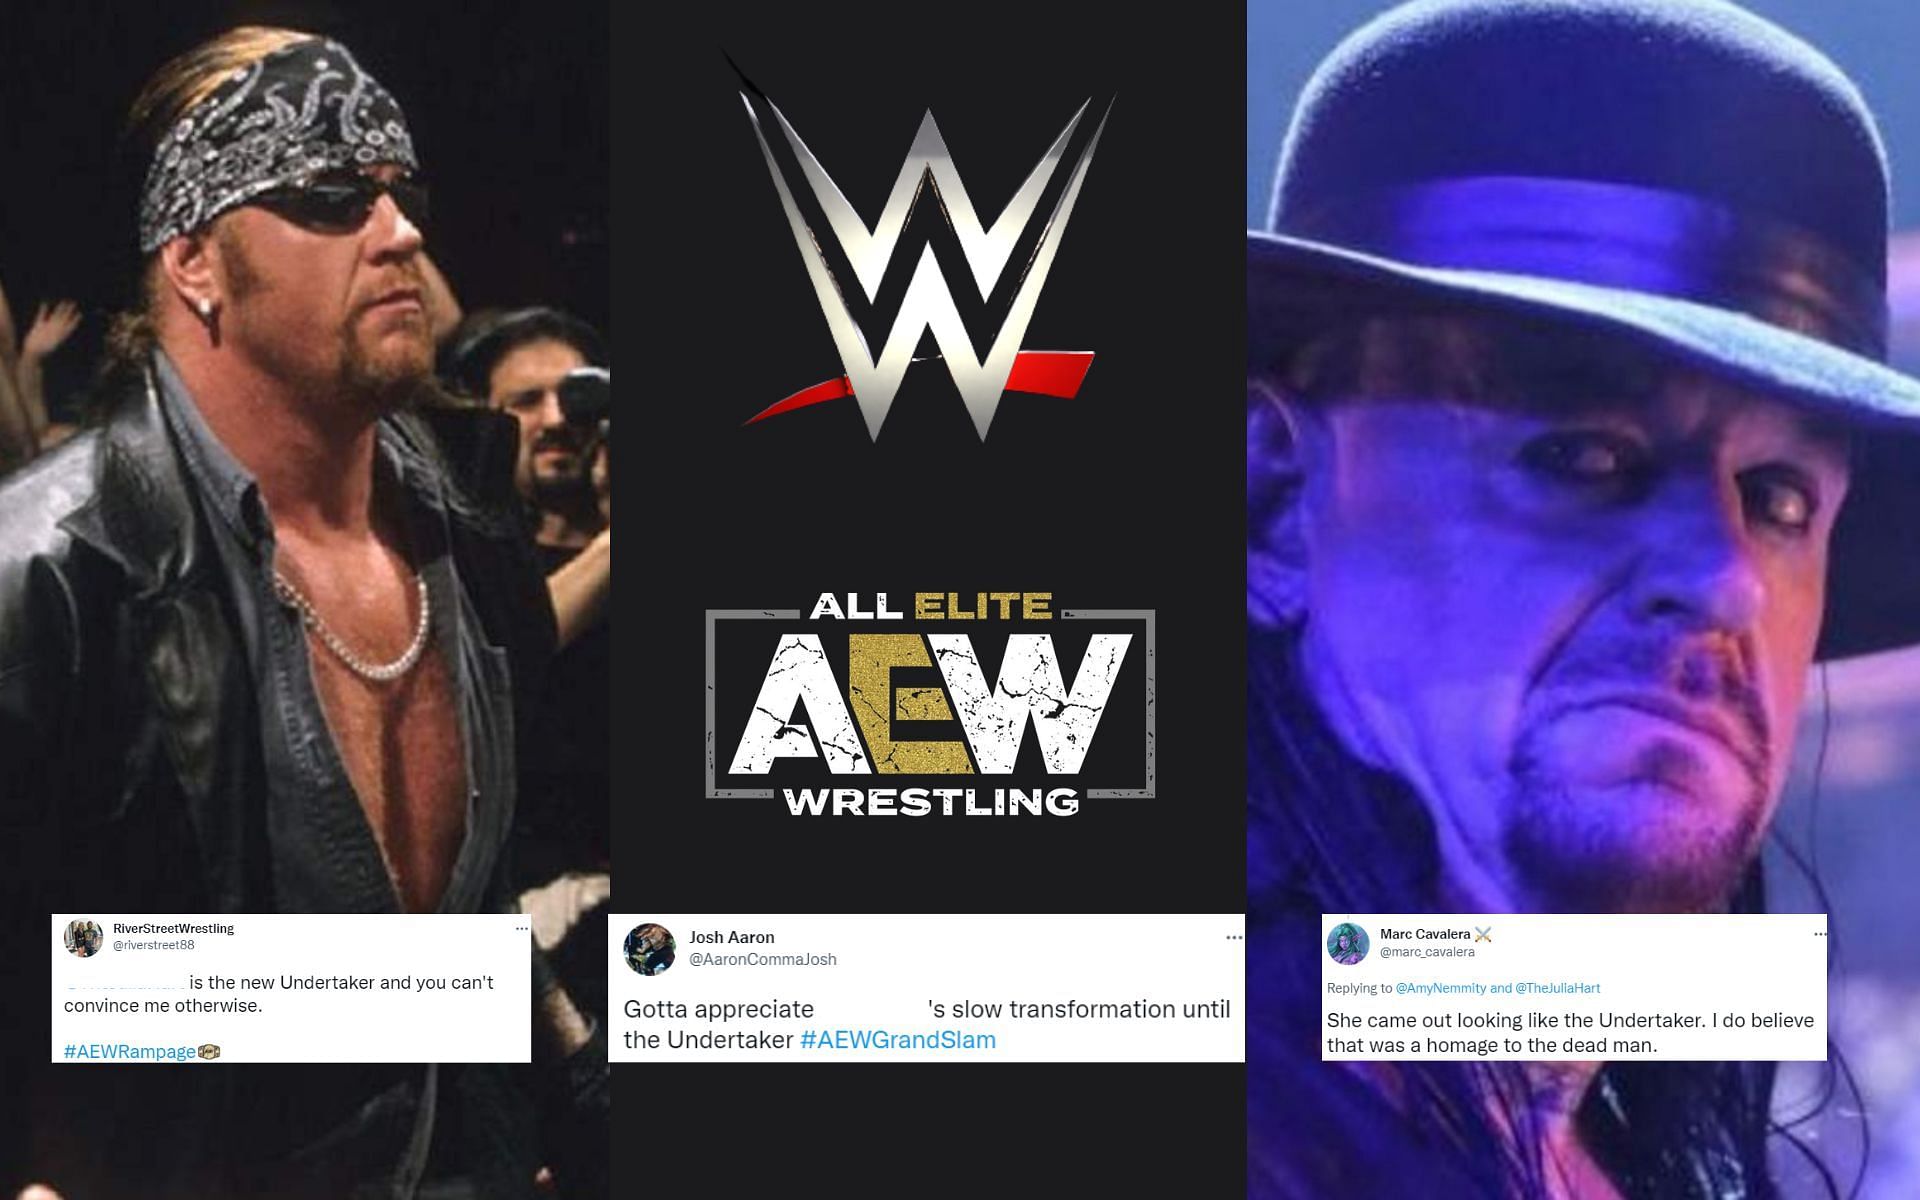 The Undertaker was associated with WWE for nearly three decades